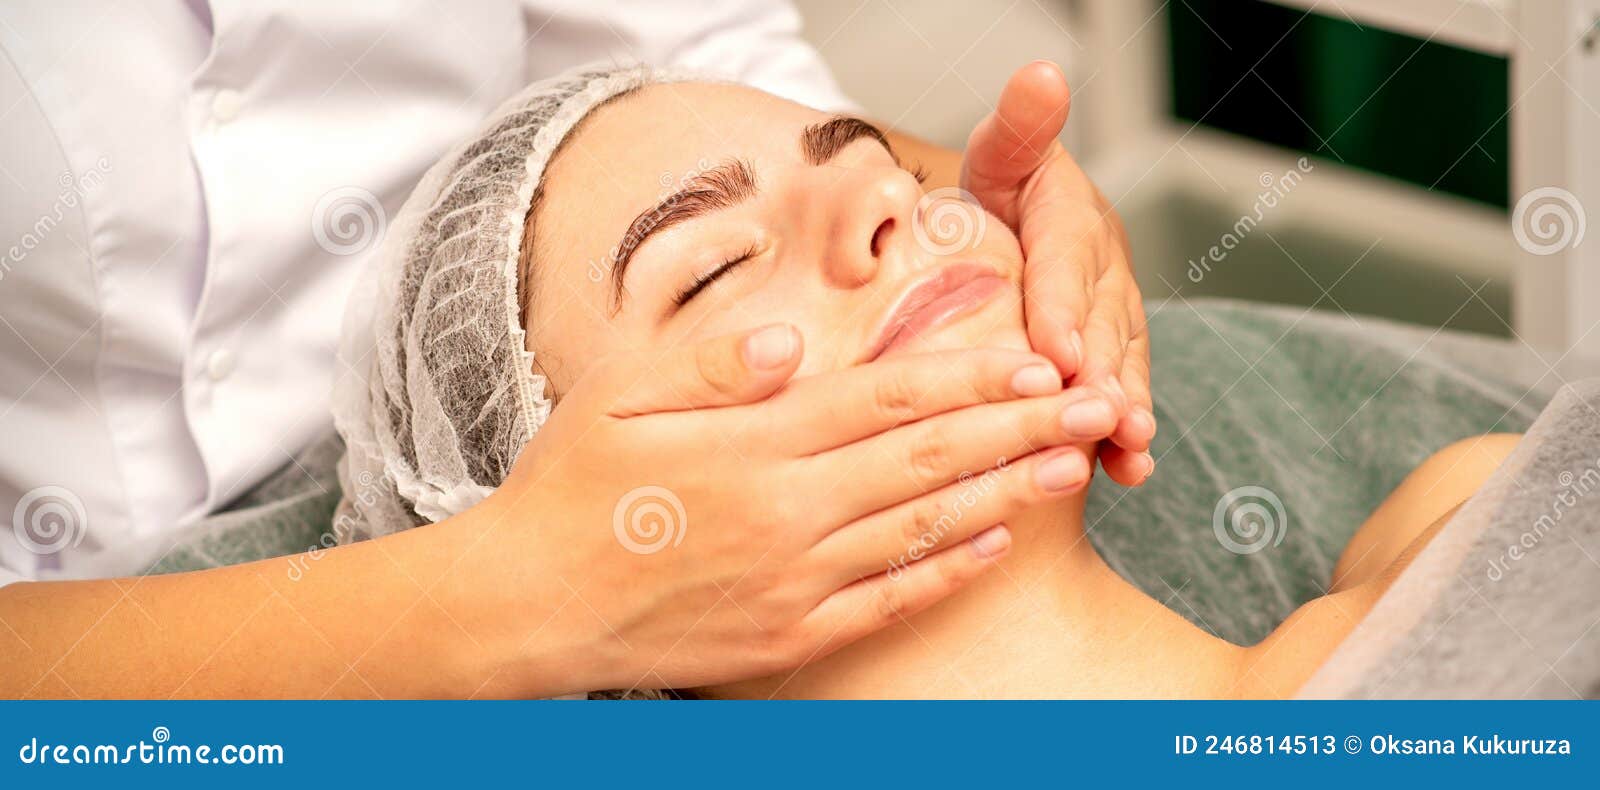 Beautiful Caucasian Young Woman Receiving A Facial Massage With Closed Eyes In Spa Salon Close